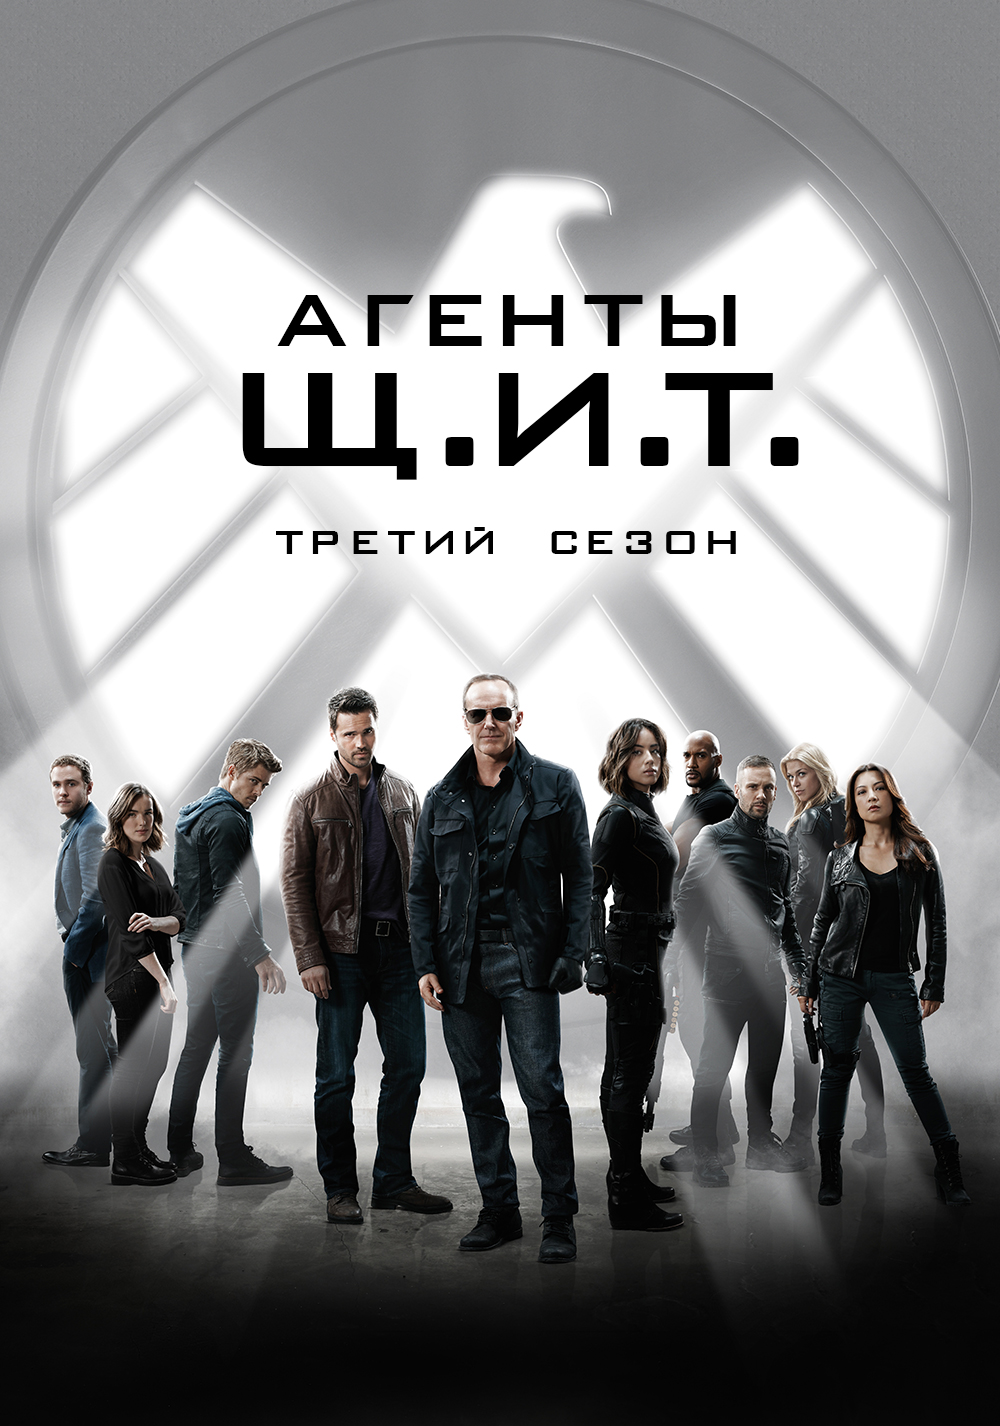 download agents of shield episode 1